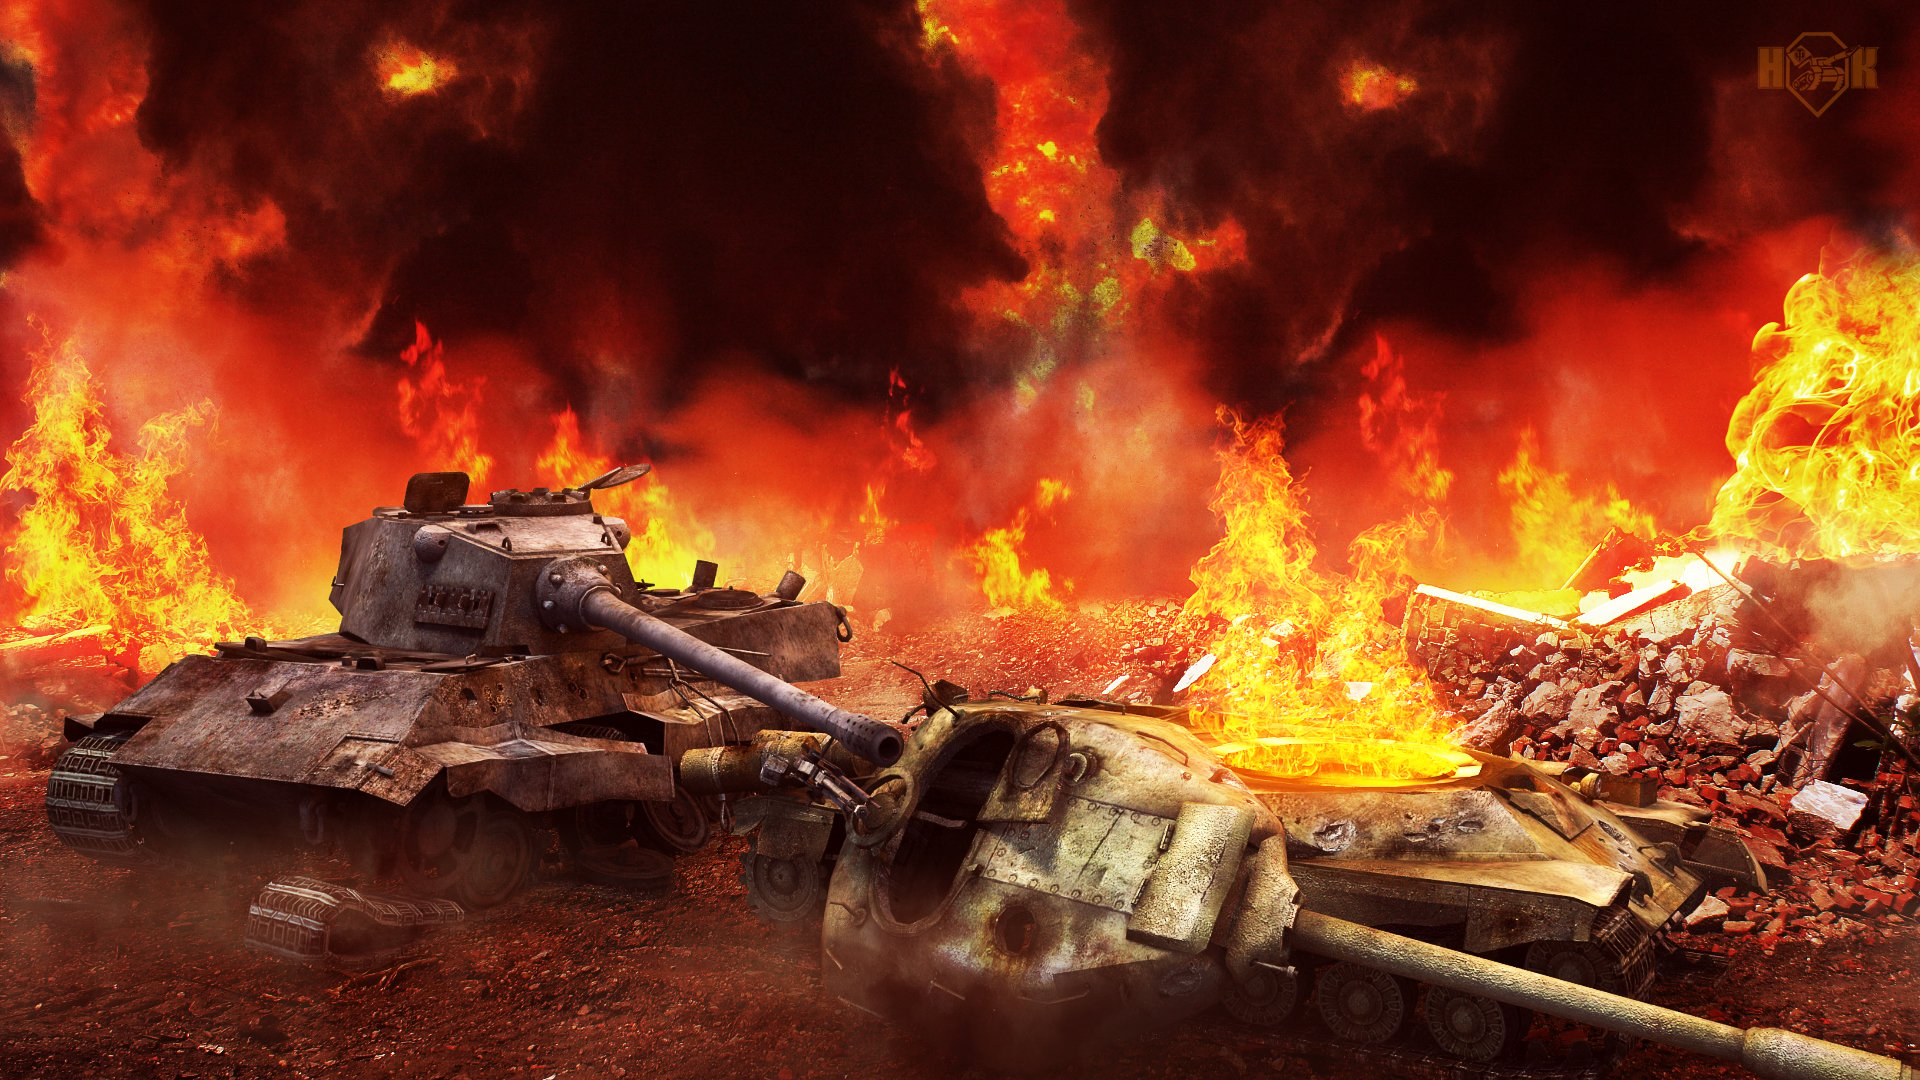 world, Of, Tanks, Military, Weapons, Fire, Destruction Wallpaper HD / Desktop and Mobile Background